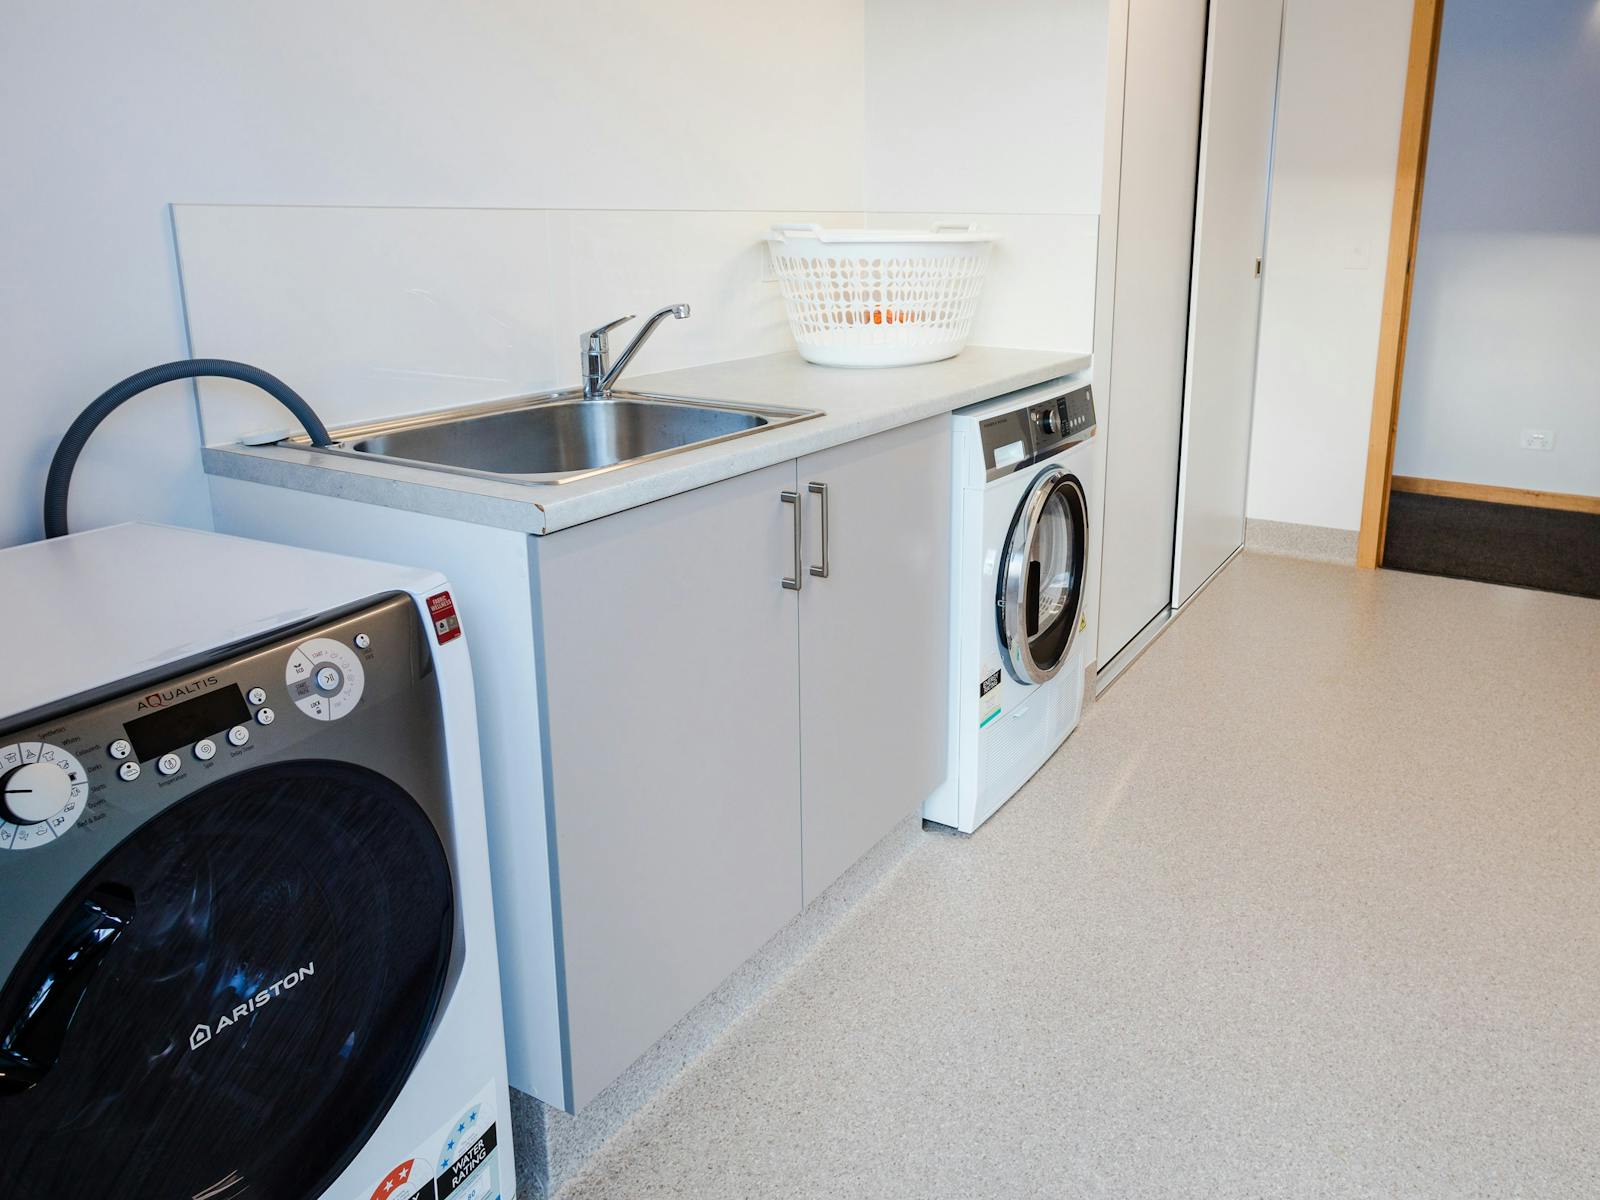 The laundry has a front-loading washing machine, separate tumble dryer and a large tub